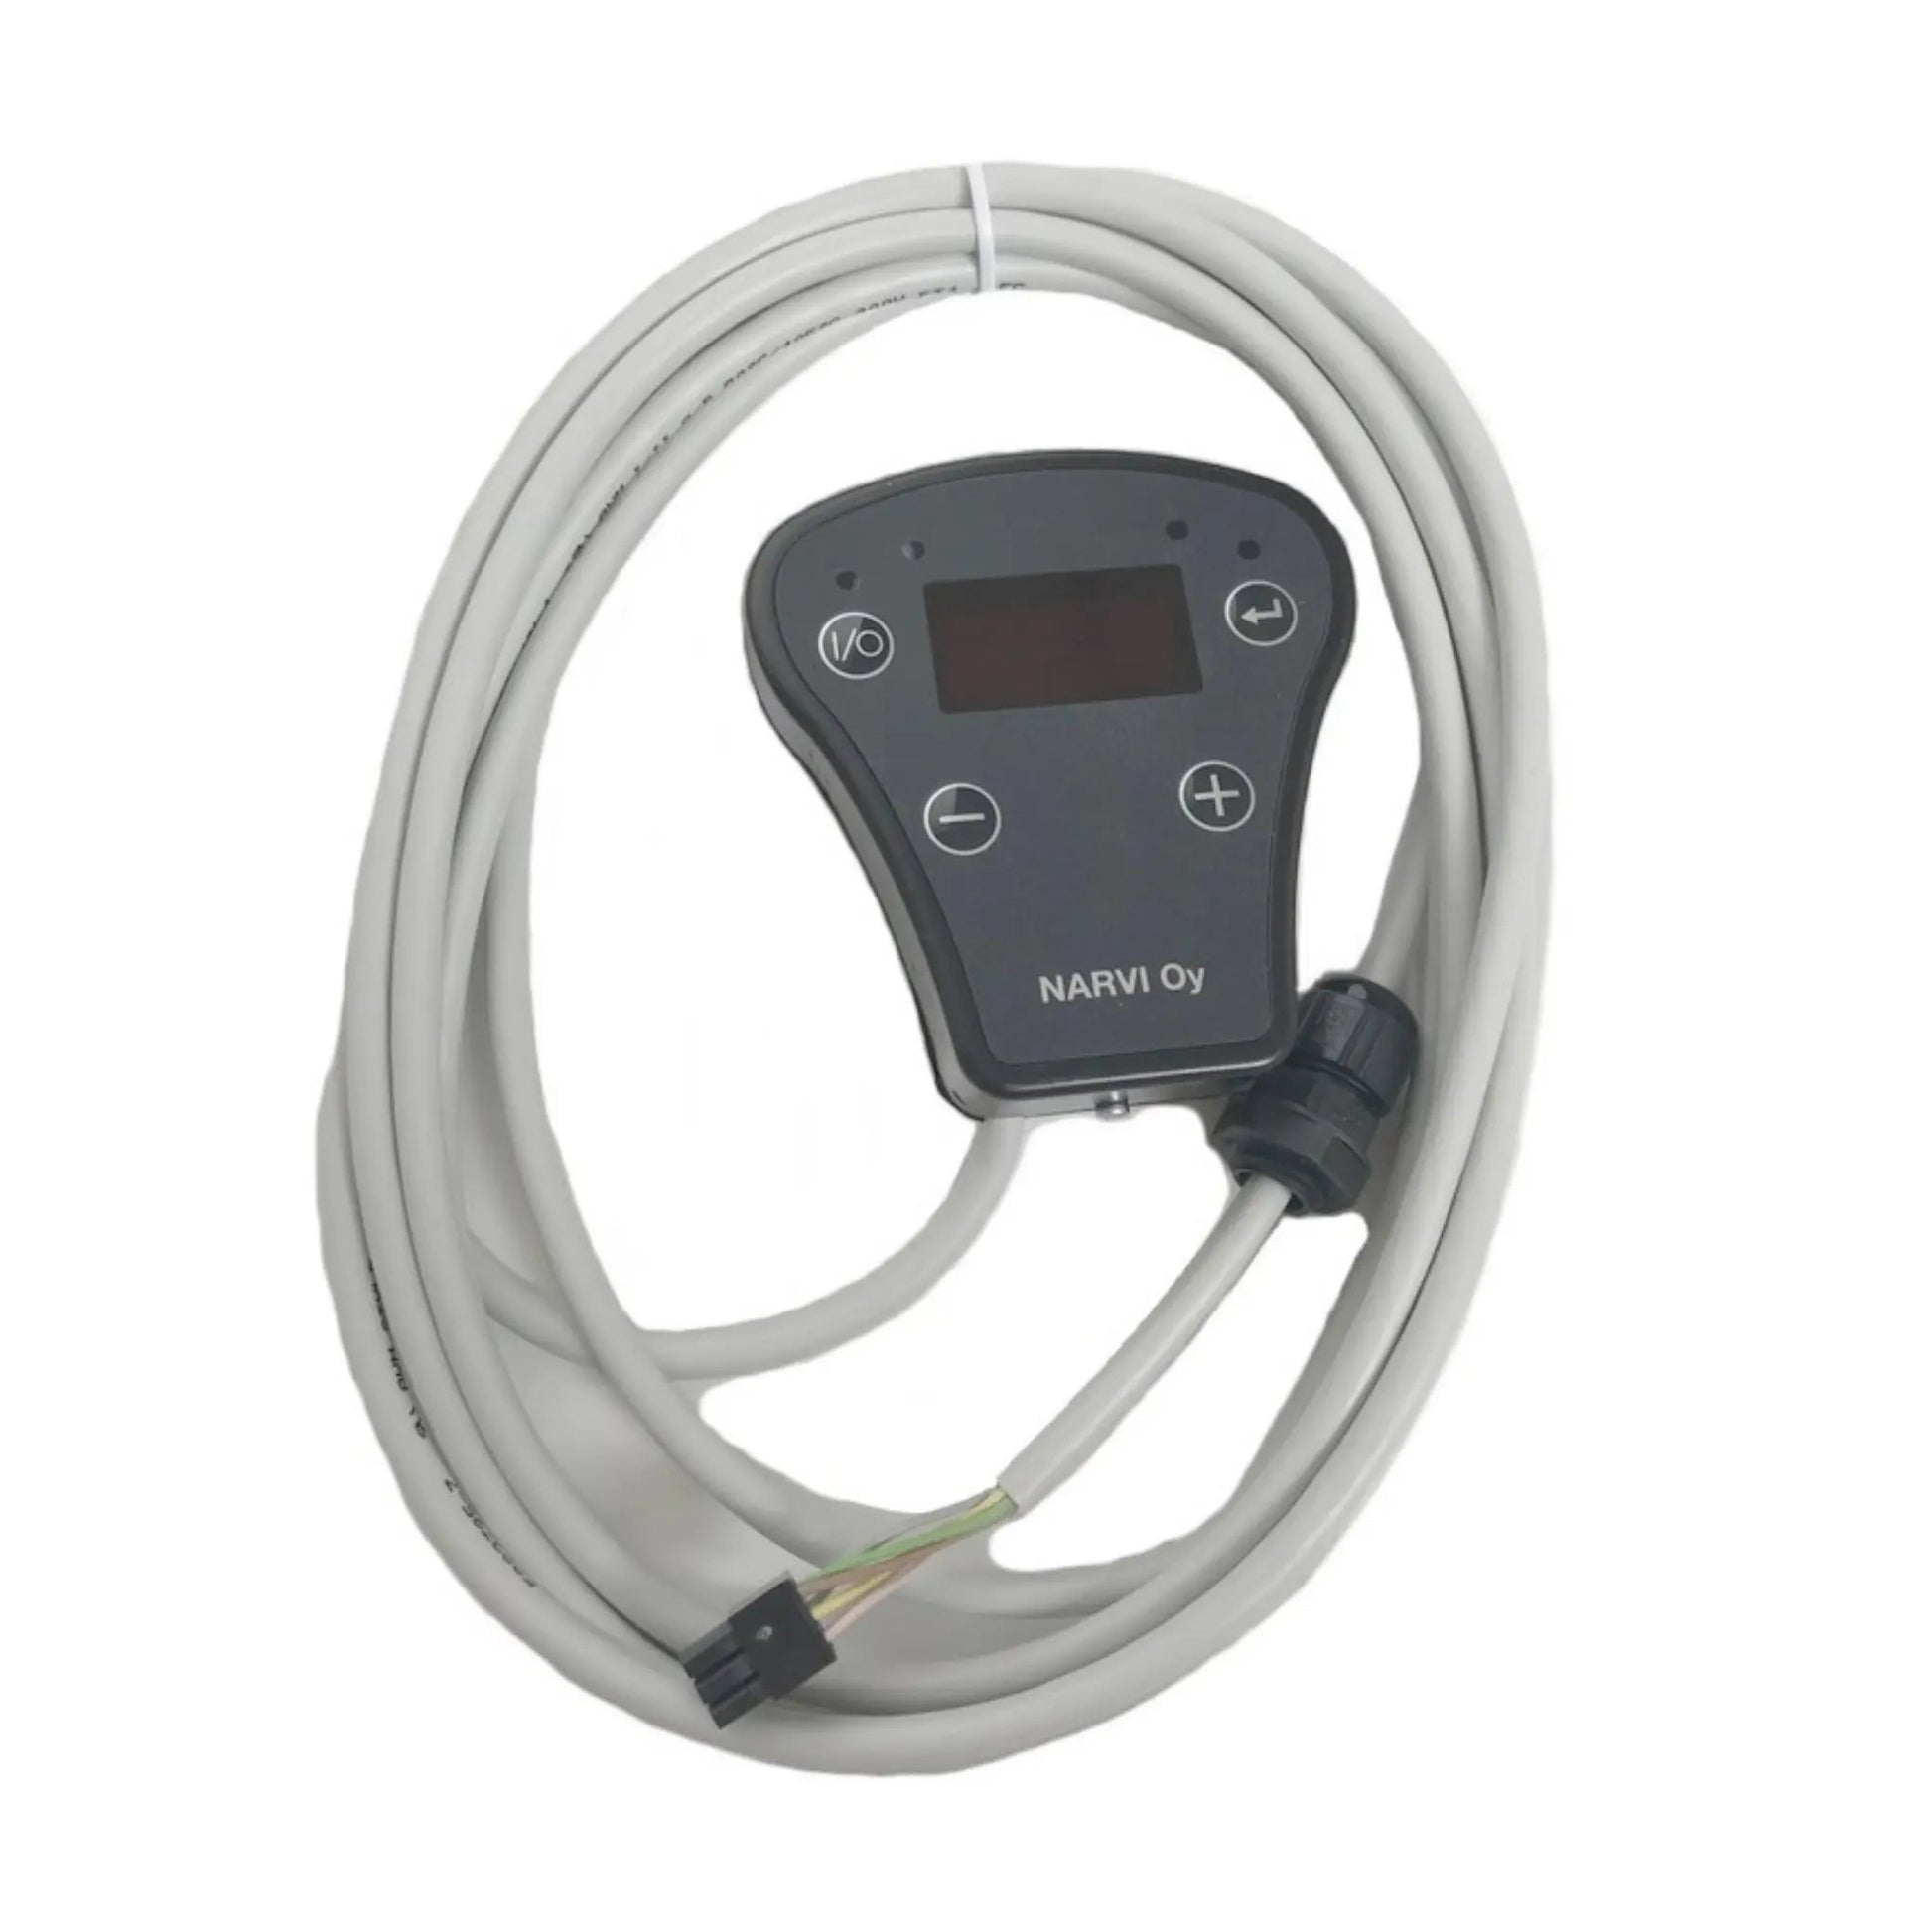 Control Panel N2014 Black with 3.5m 6 Pin Grey Cable cable | Finnmark Sauna